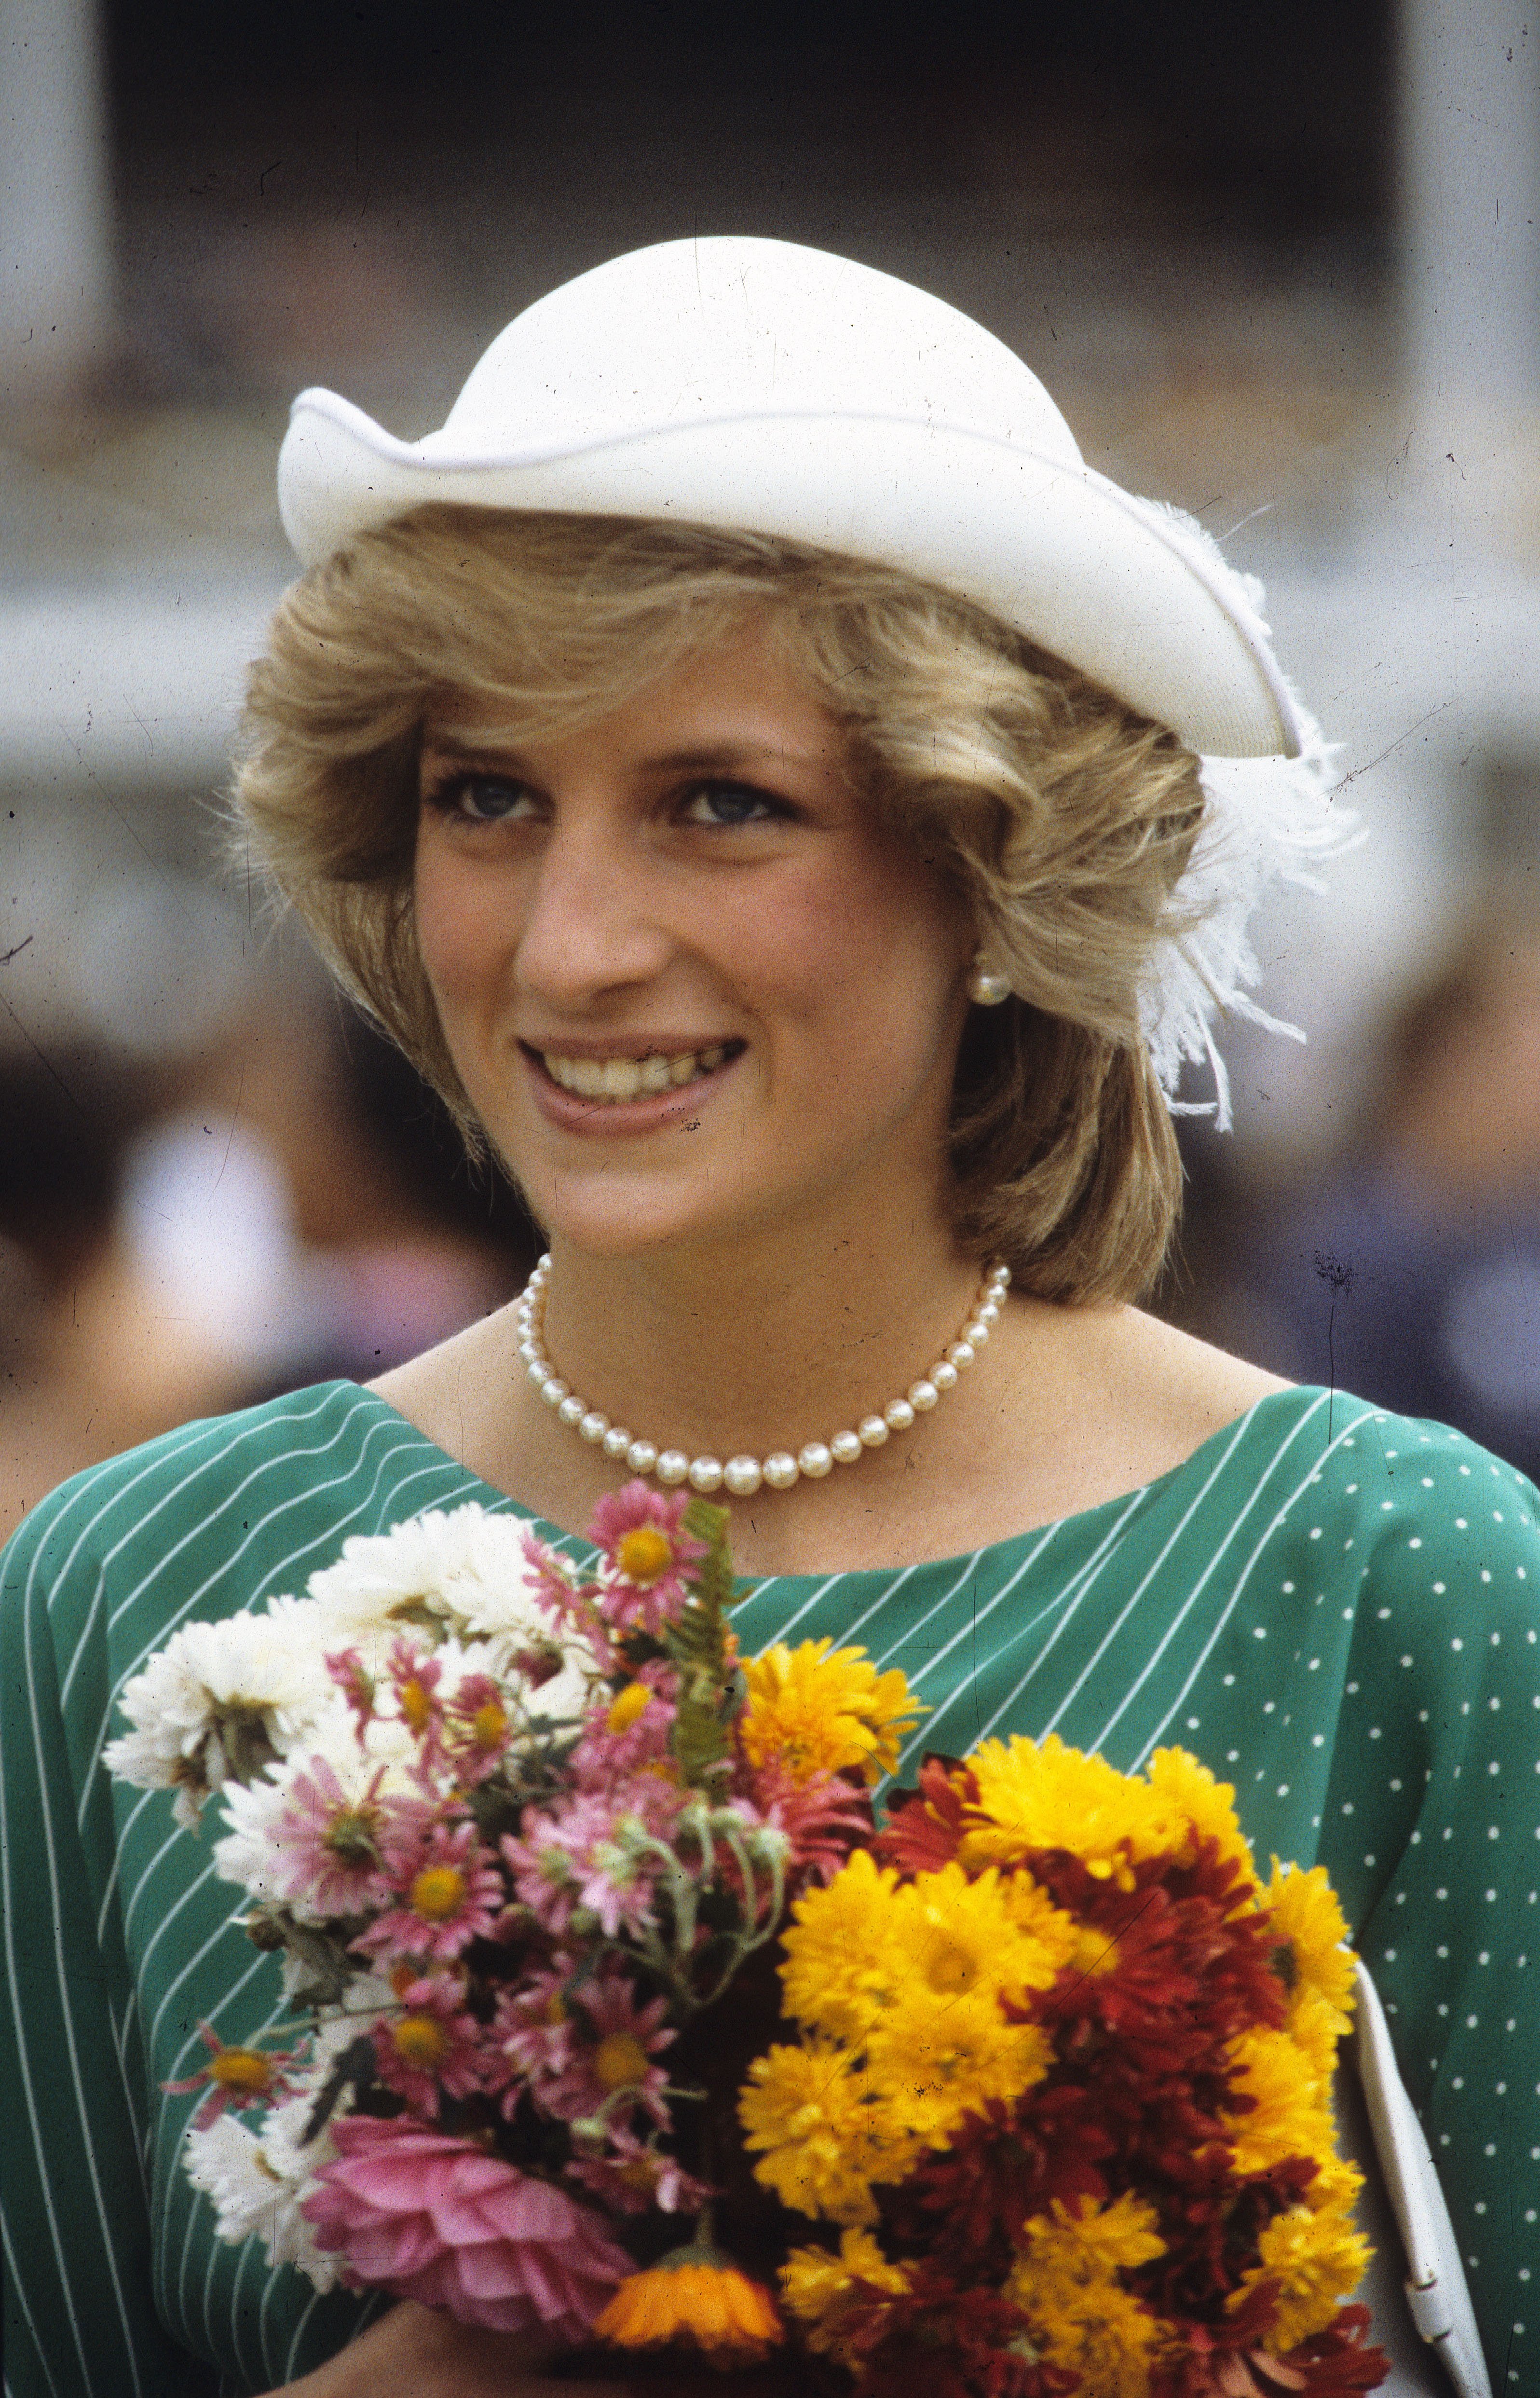 Princess Diana wearing a green and white striped dress and white hat at a welcome ceremony at the Eden Park Stadium in 1983 in Auckland, New Zealand | Photo: Anwar Hussein/Getty Images